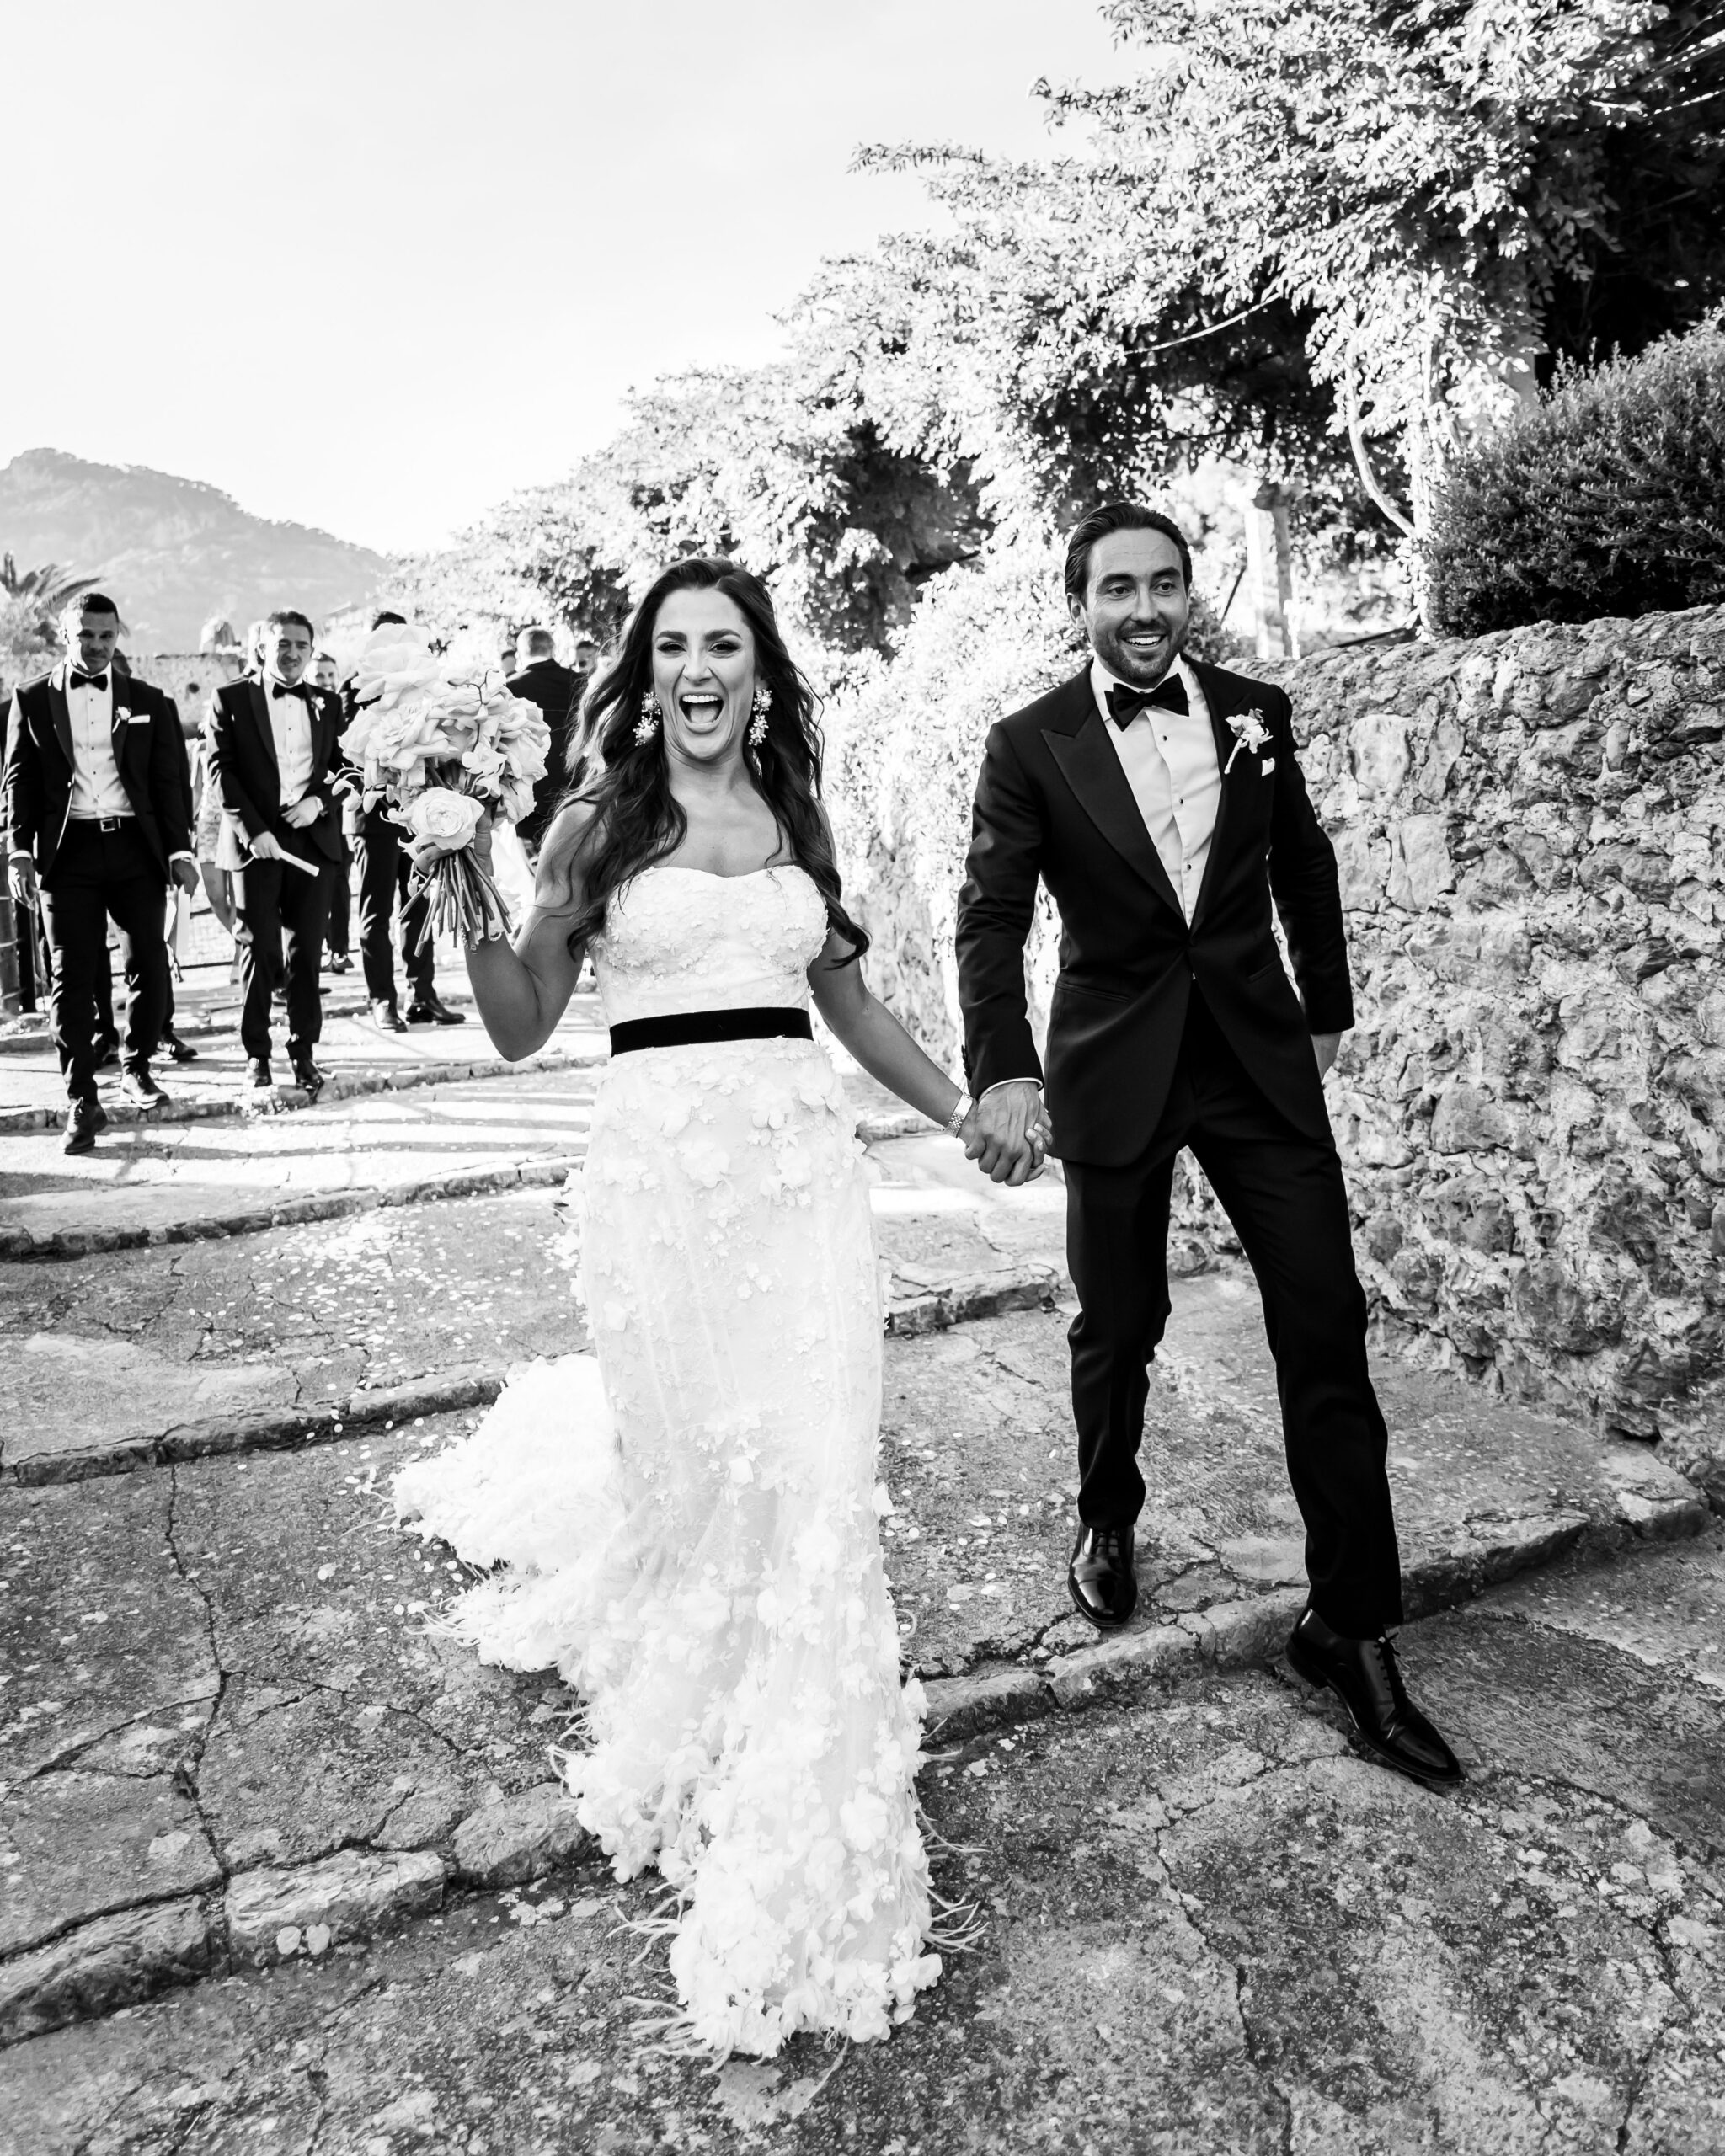 A couple walking through the gardens of Jardines De Alfabia in Mallorca after just being married, black and white stylish couple walking together on their wedding day, holding flower in the air celebrating their nuptials